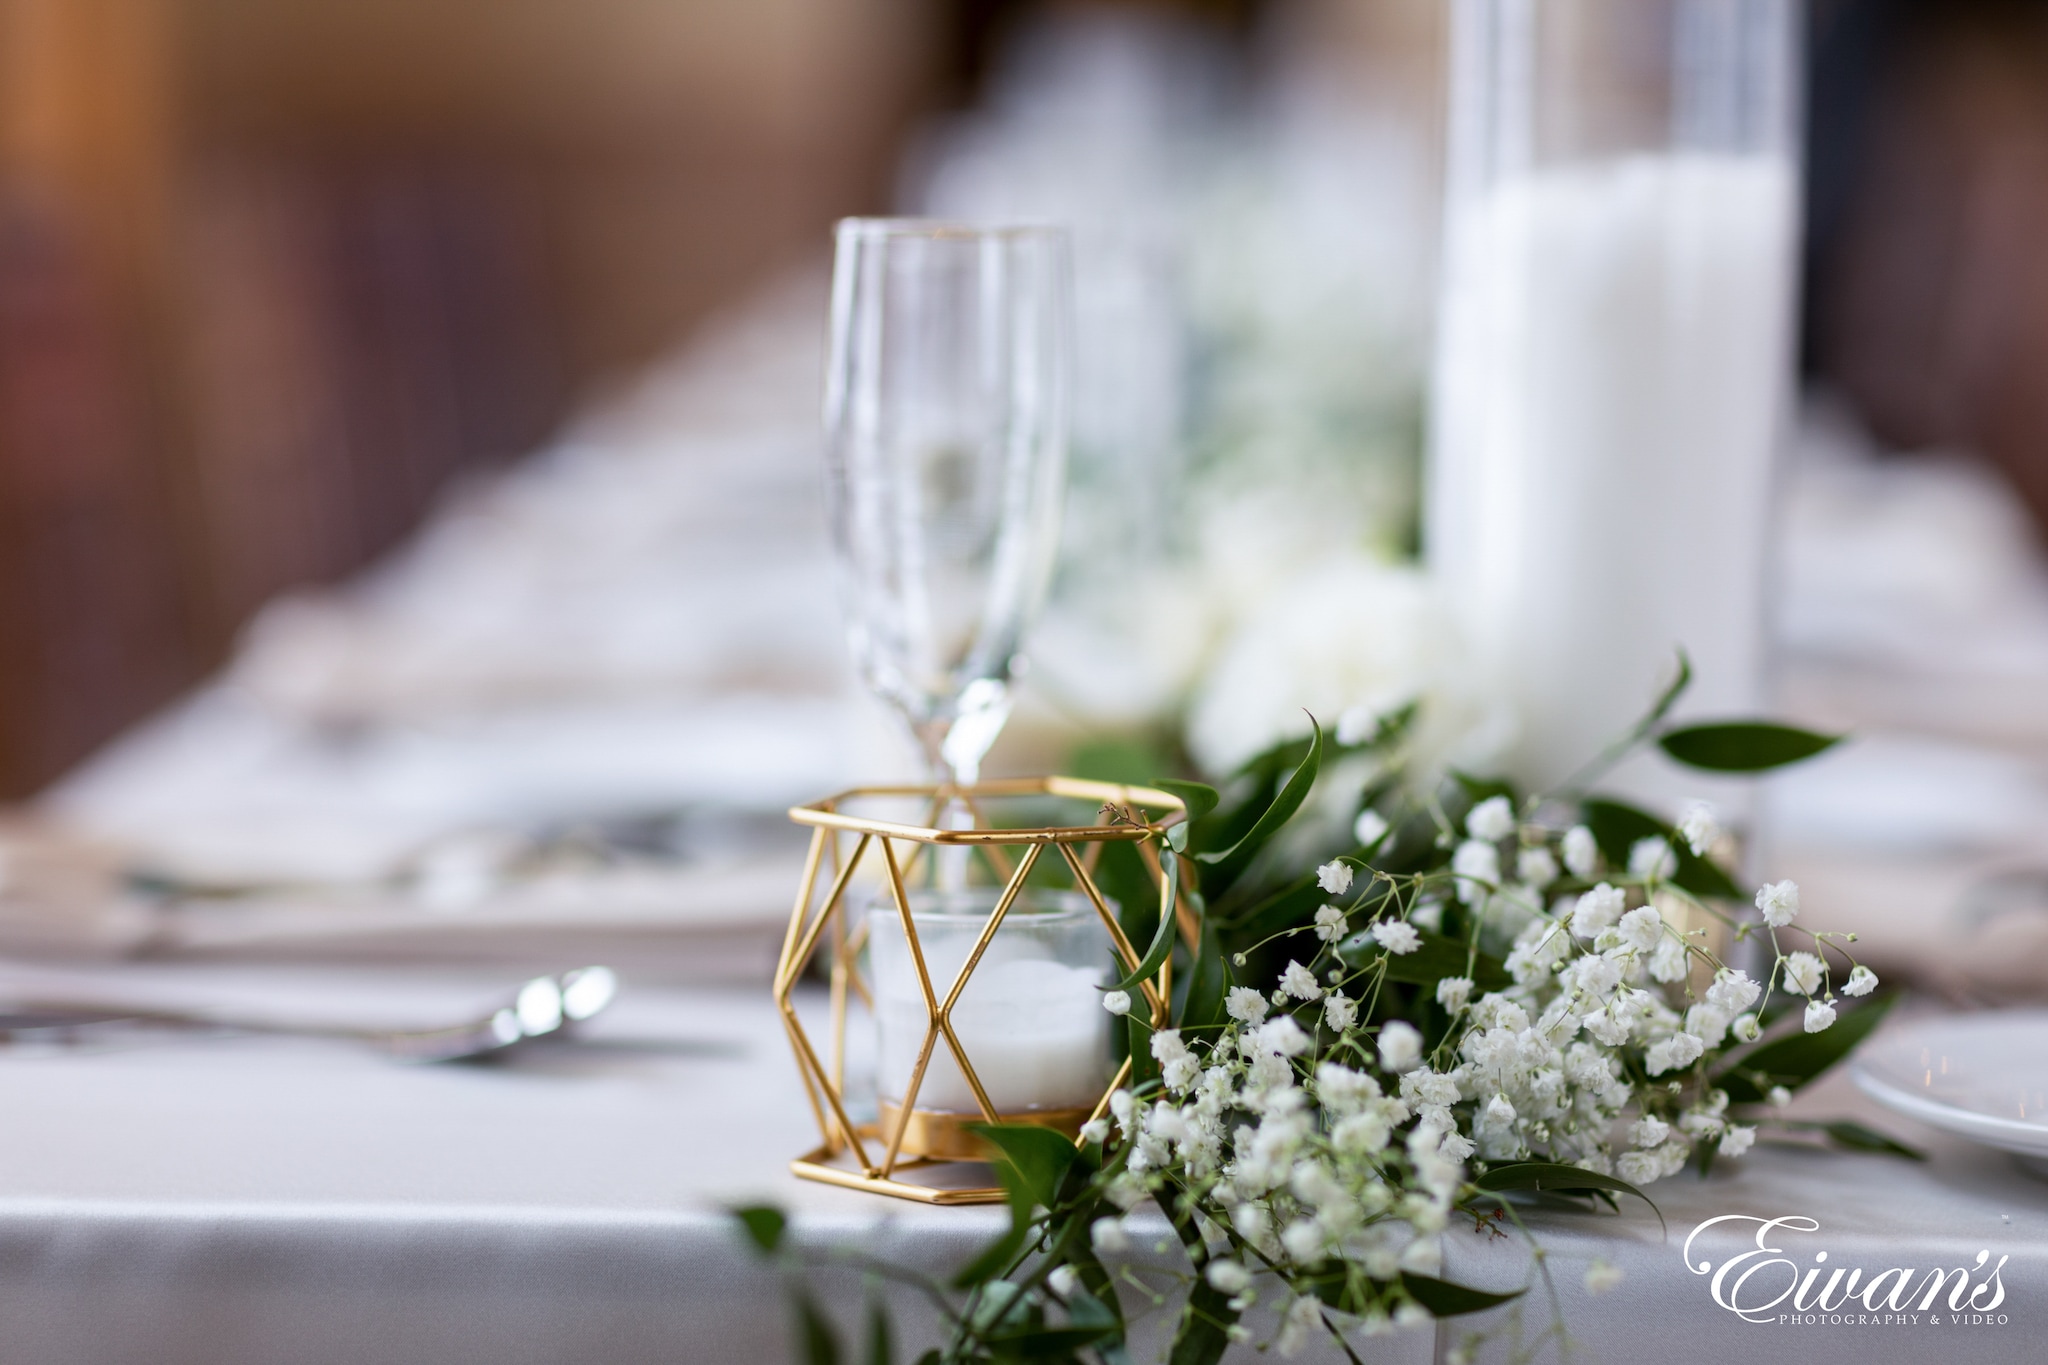 50 Stunning Wedding Table Decor Ideas | For Better For Worse